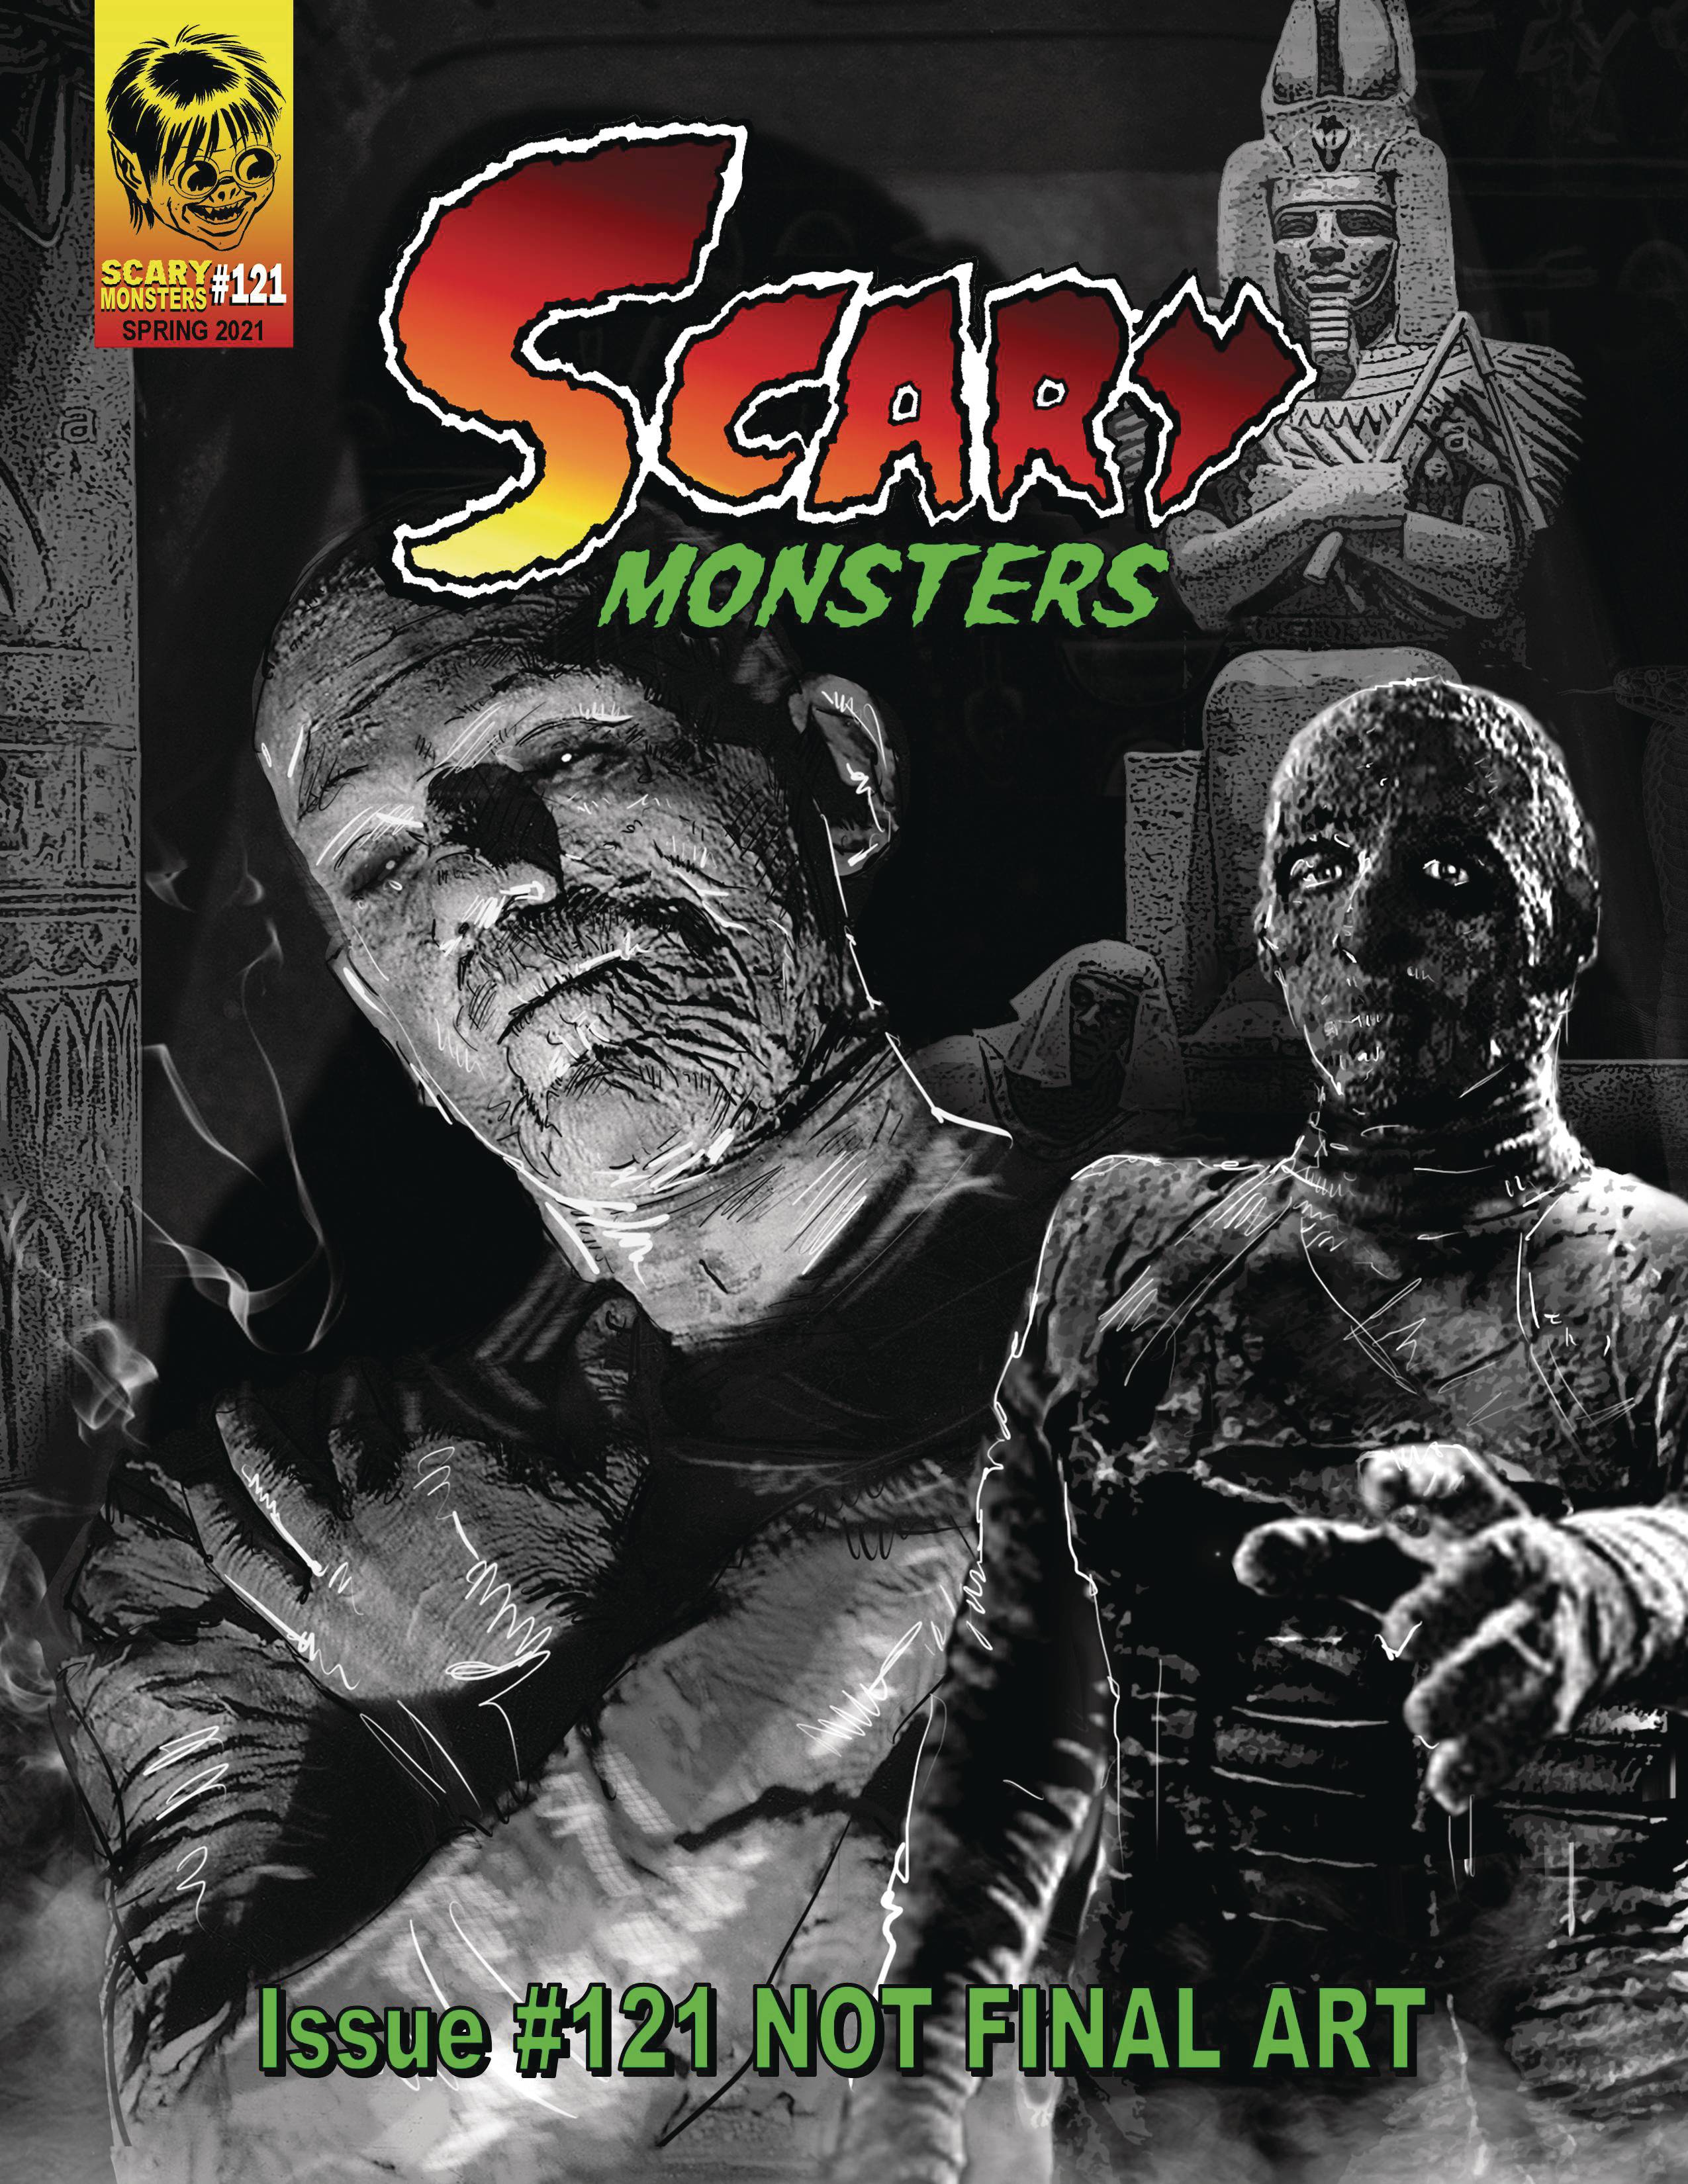 SCARY MONSTERS MAGAZINE